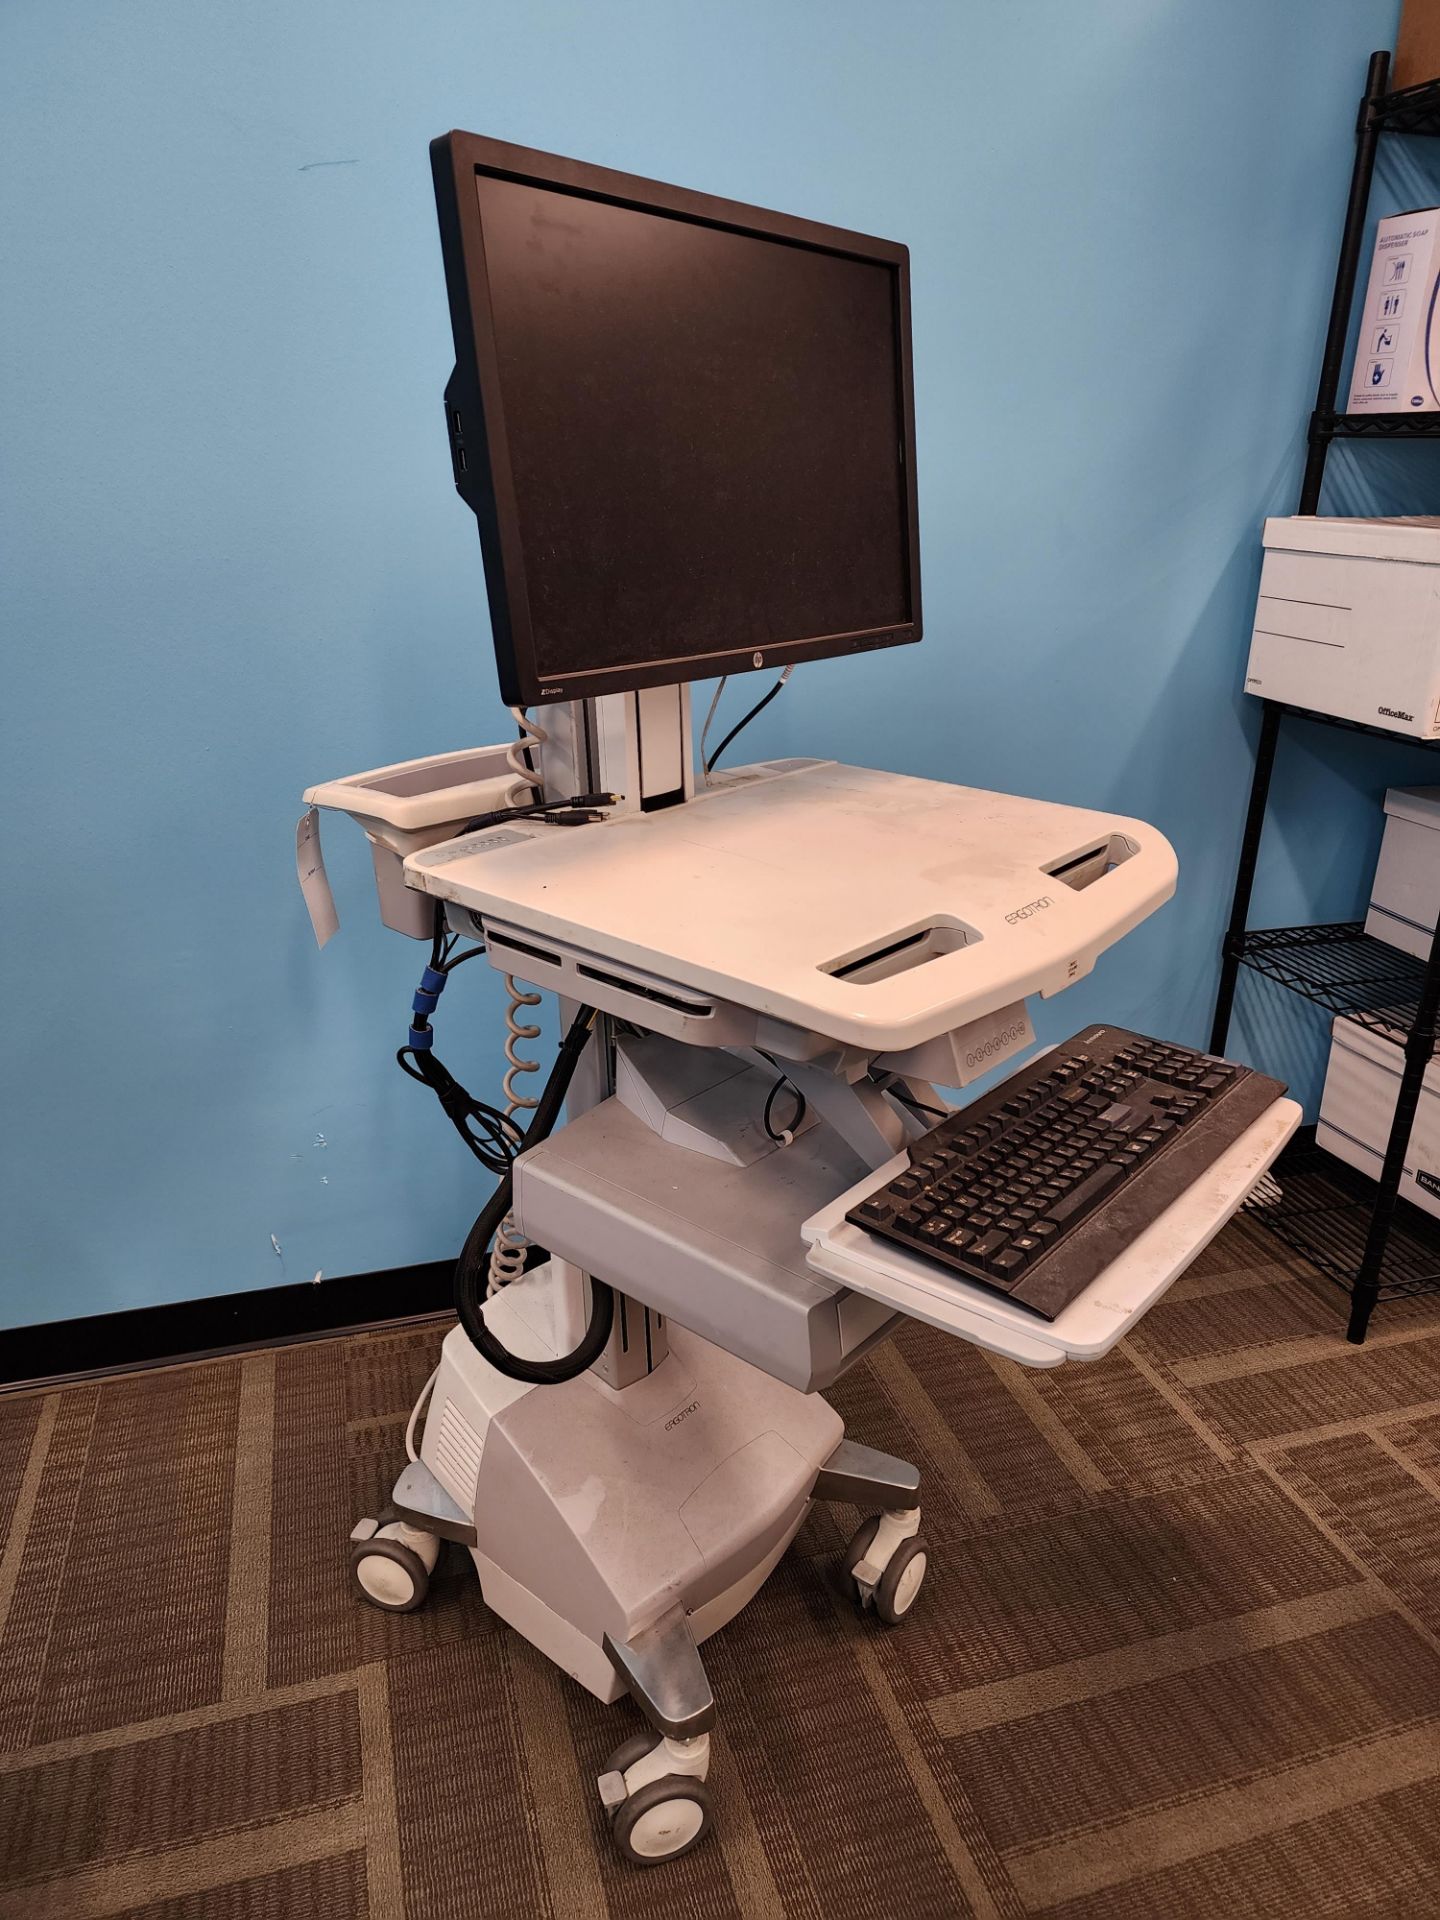 ErgoTron Model SV42-3311-1 "StyleView" Medical Cart w/LCD Mount & HP Monitor, SLA Powered, 1 - Image 6 of 10